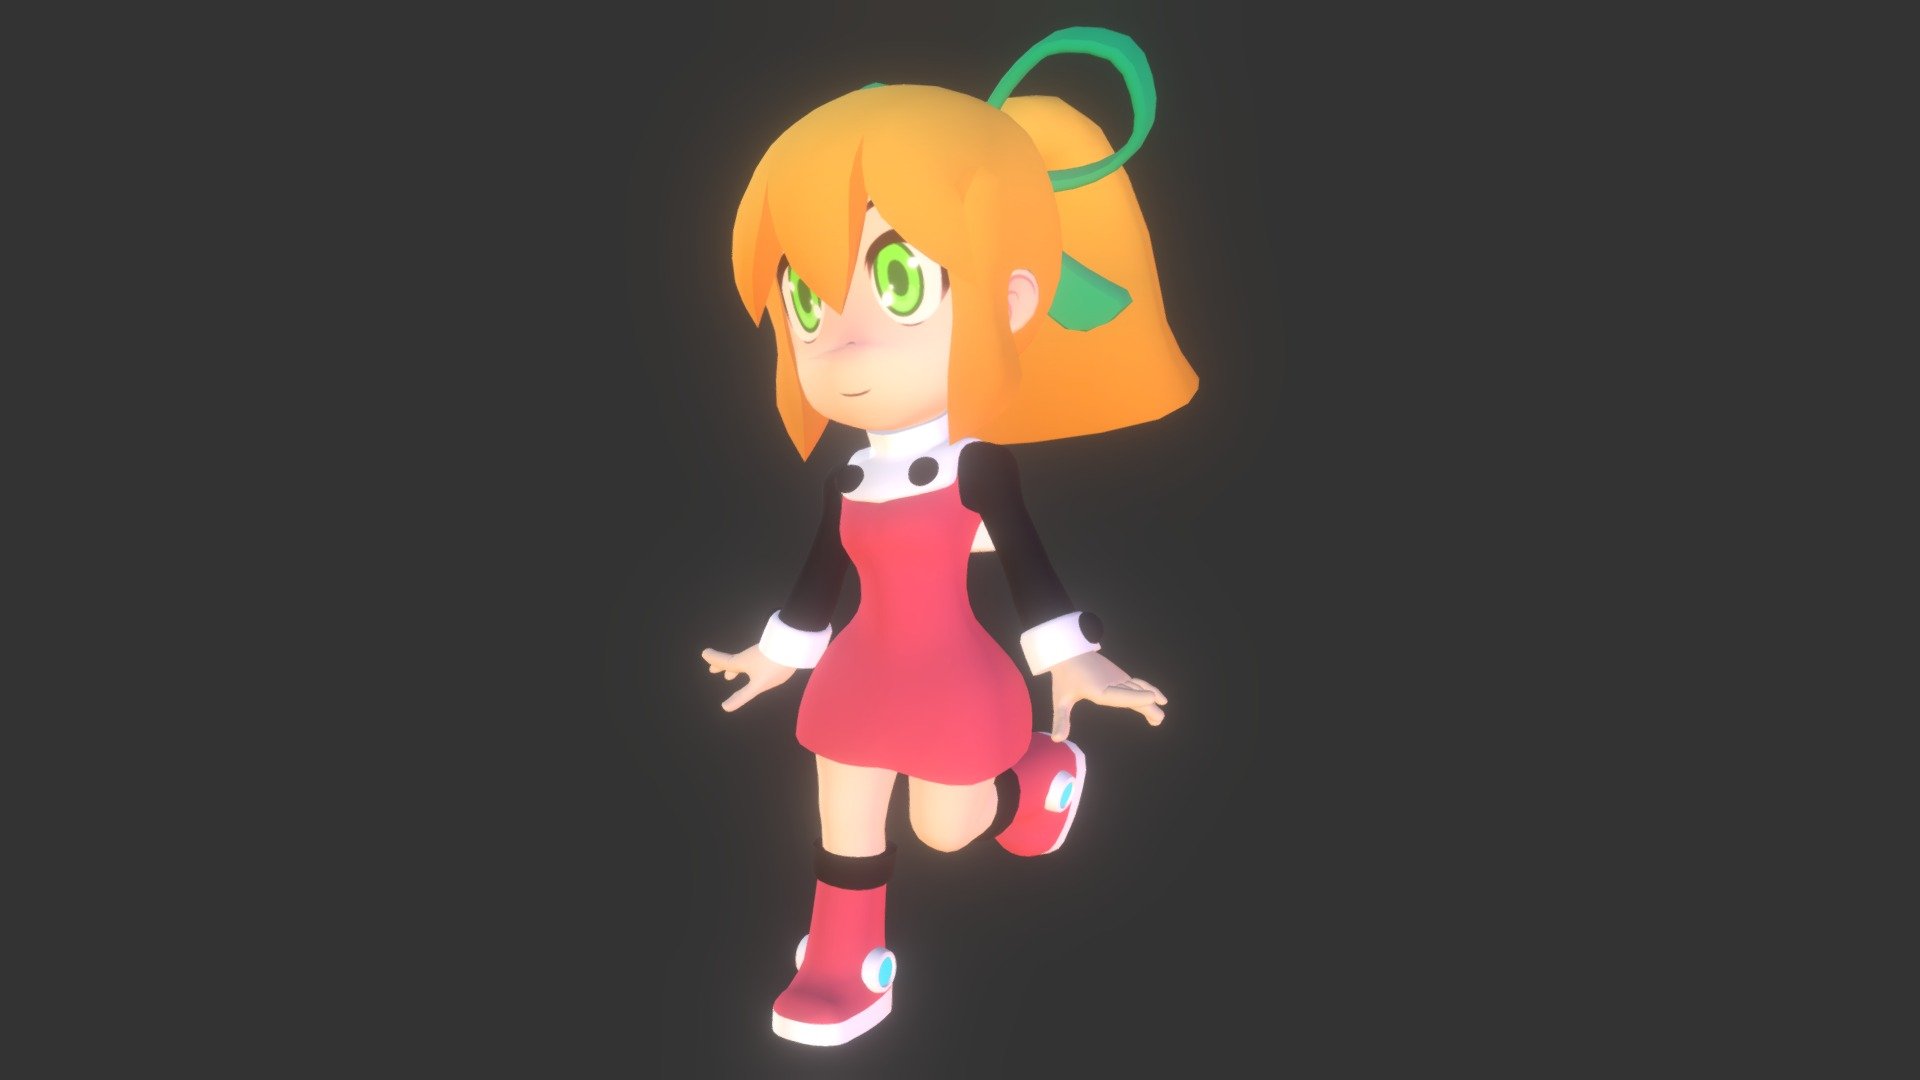 Modeling in Blender, designed for use in Unity3d.

- Rigged for Humanoid Animation

- Compatible with Mixamo's 3D animation

- Editable File Included (Blender 2.79)



Roll is a character property by Capcom. Copyright © 2017 Capcom. All rights reserved 3d model